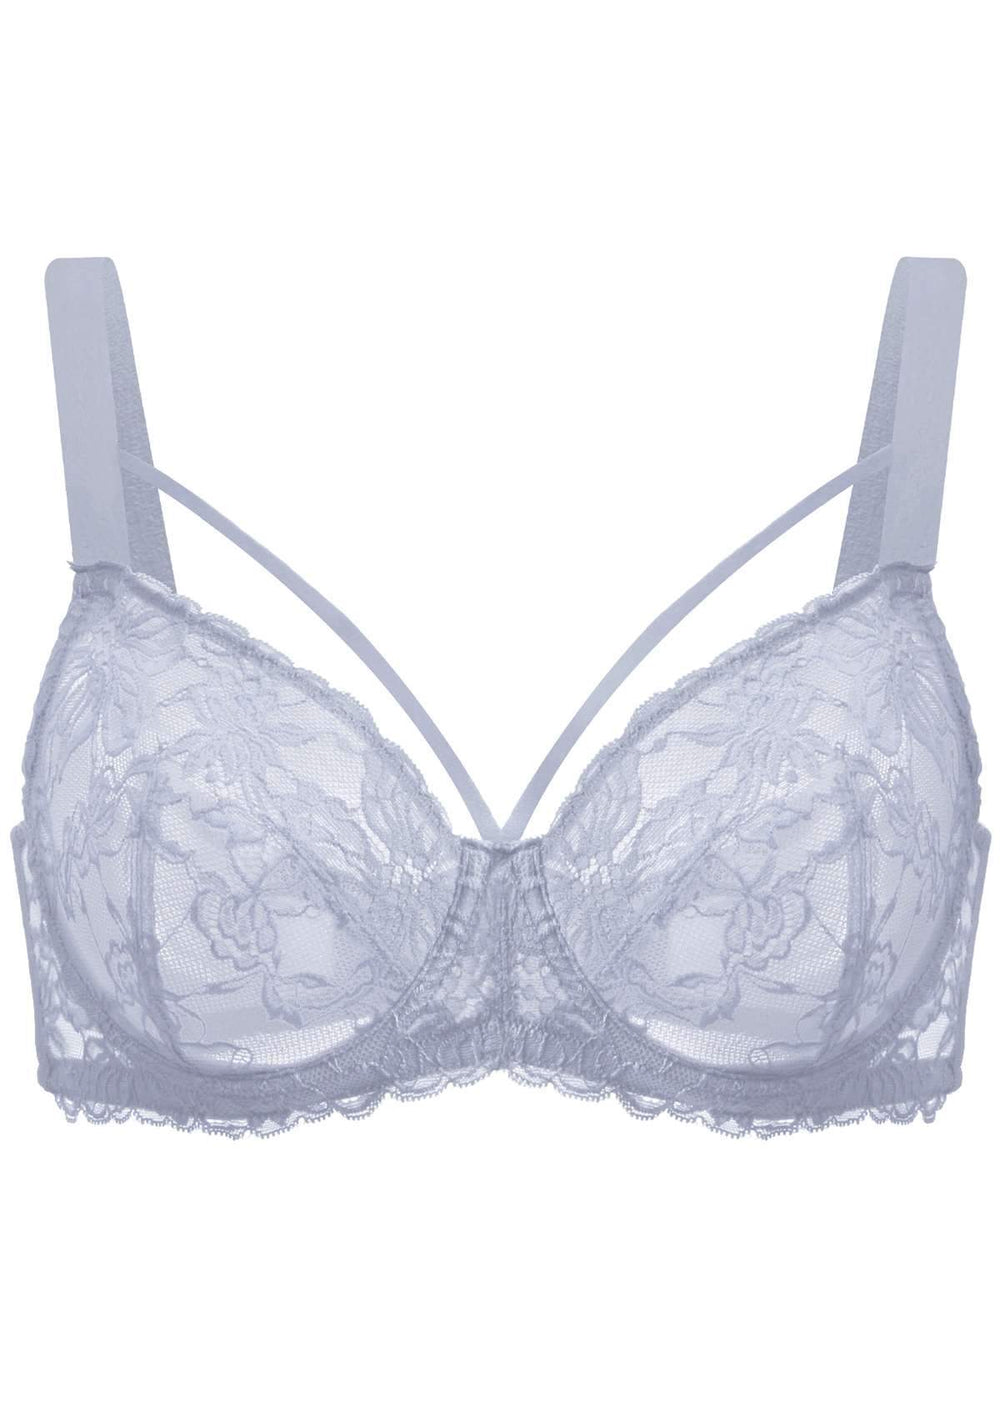 HSIA Pretty In Petals See-Through Lace Bra: Lift and Separate